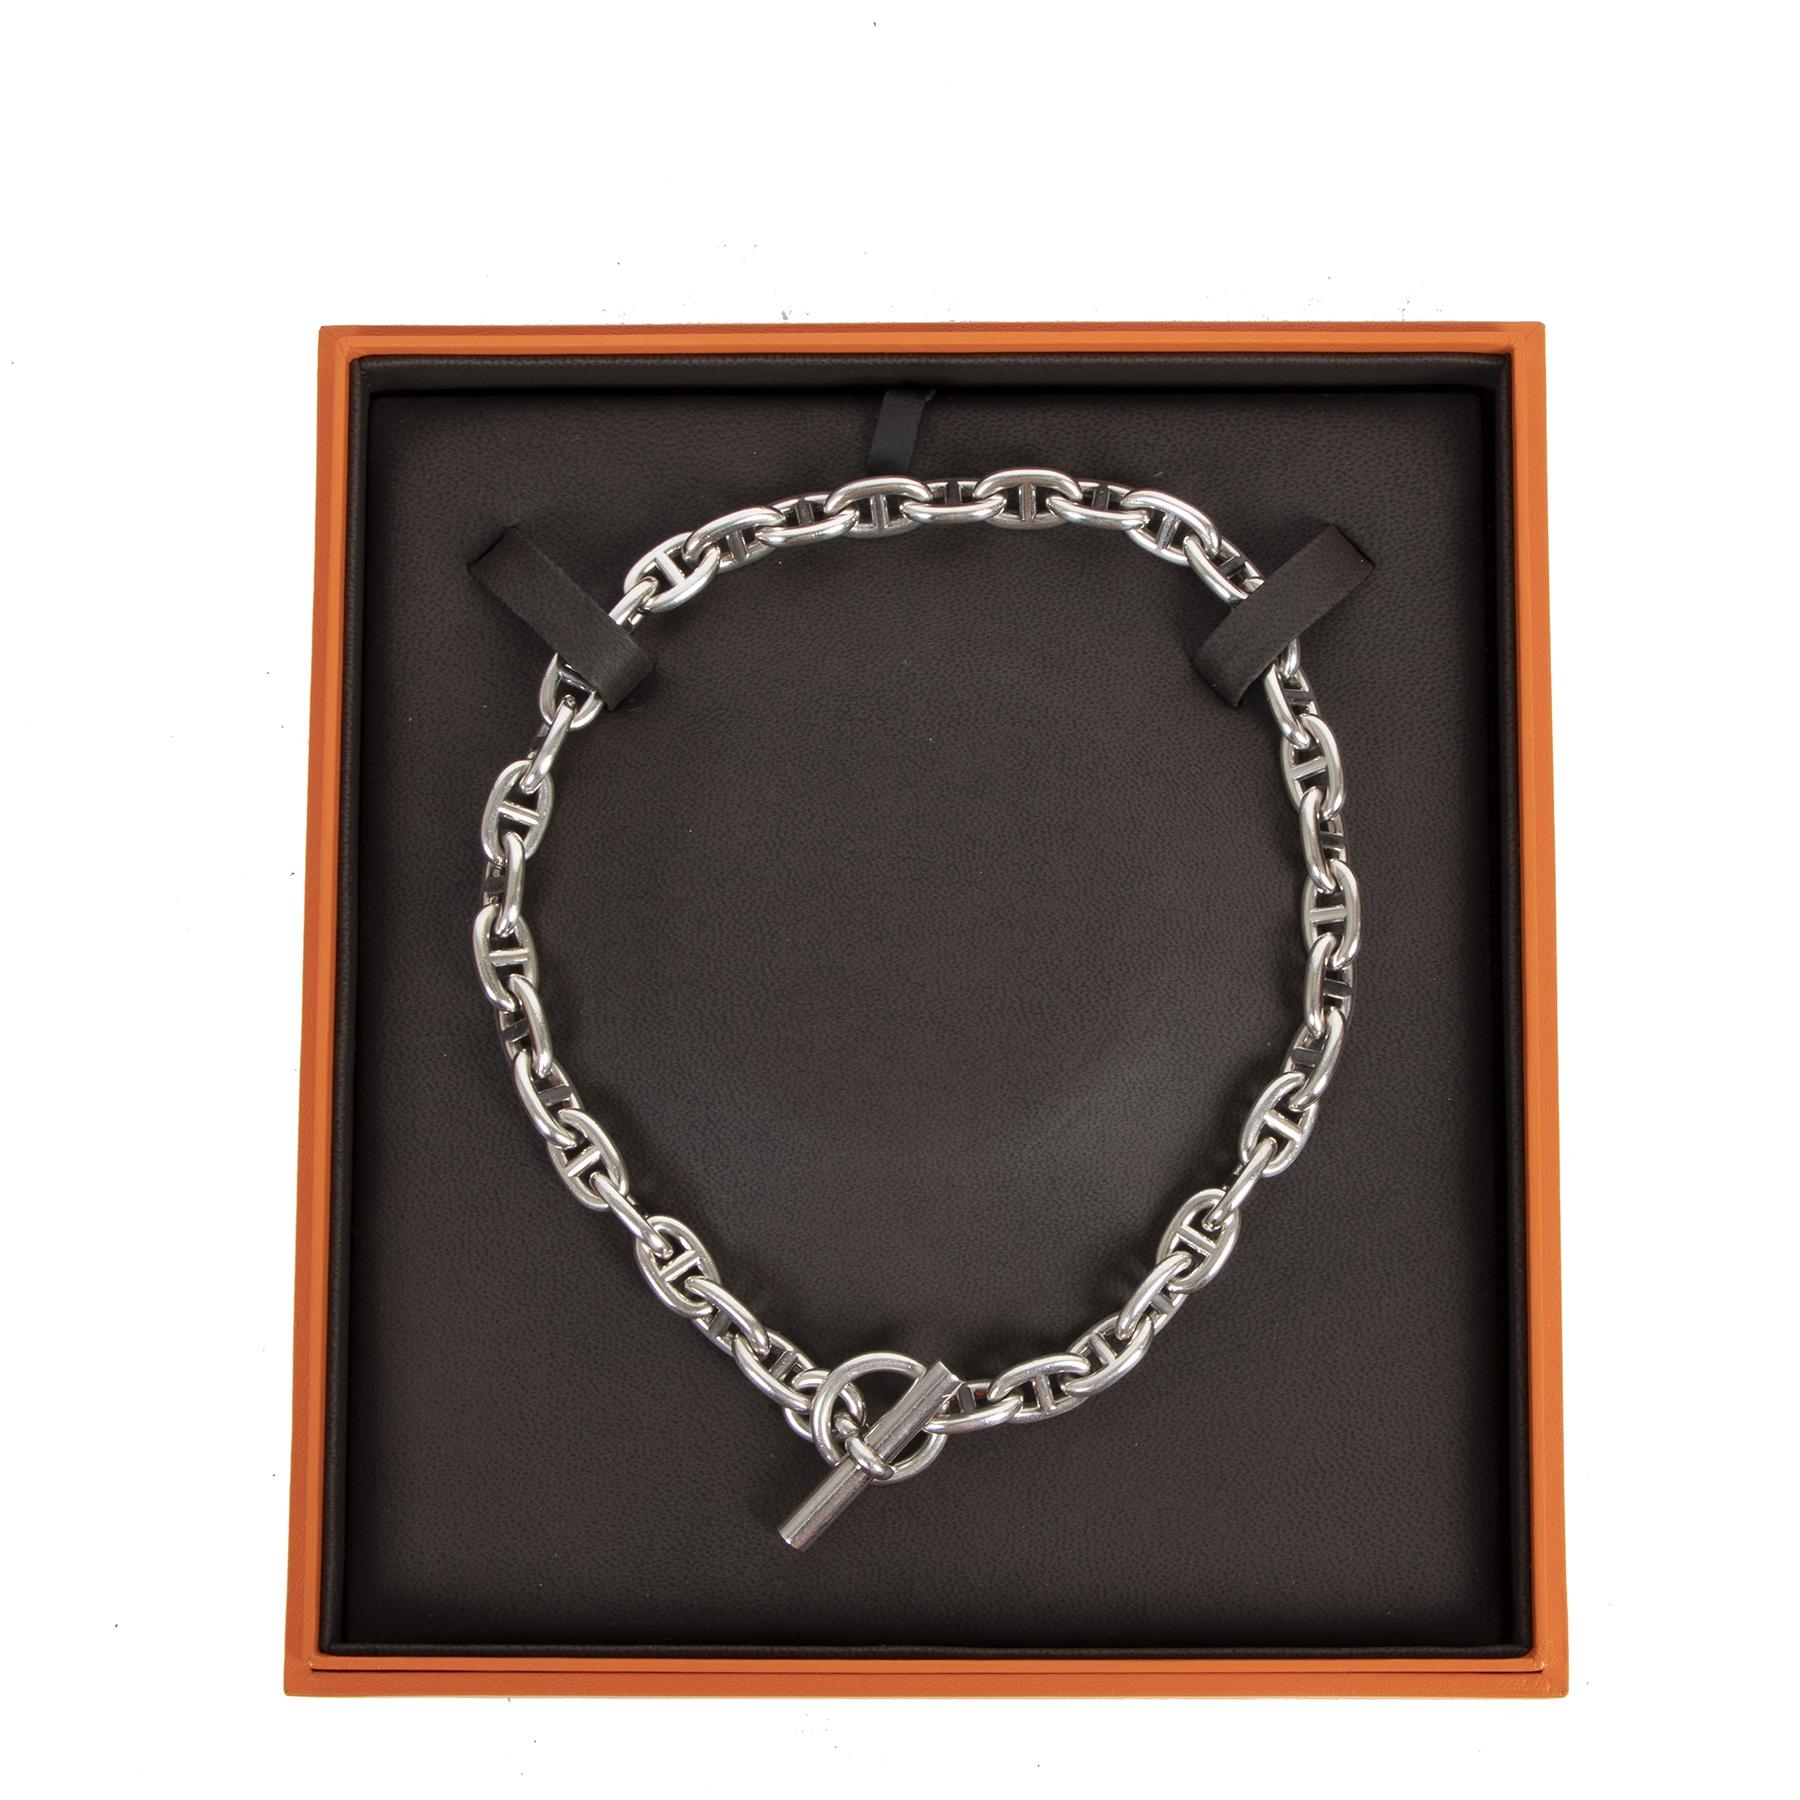 Very good preloved condition

Hermès Chaine D'Ancre Necklace 

This gorgeous Hermès Chaine D'Ancre Necklace is such an elegant accessory that matches easily with any outfit. The necklace is crafted in silver and features the iconic intertwined